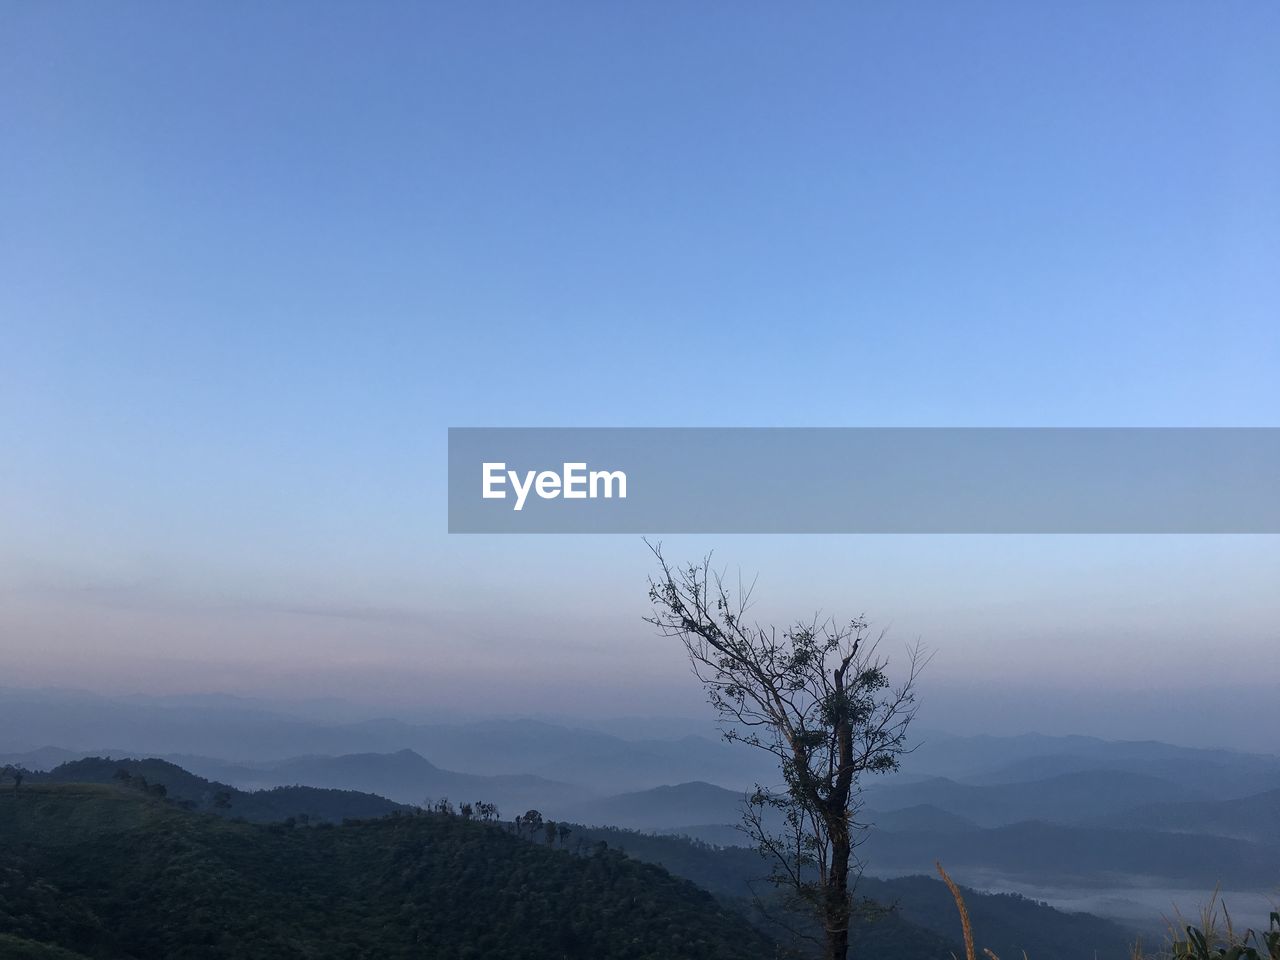 Scenic view of mountains against clear sky at sunset